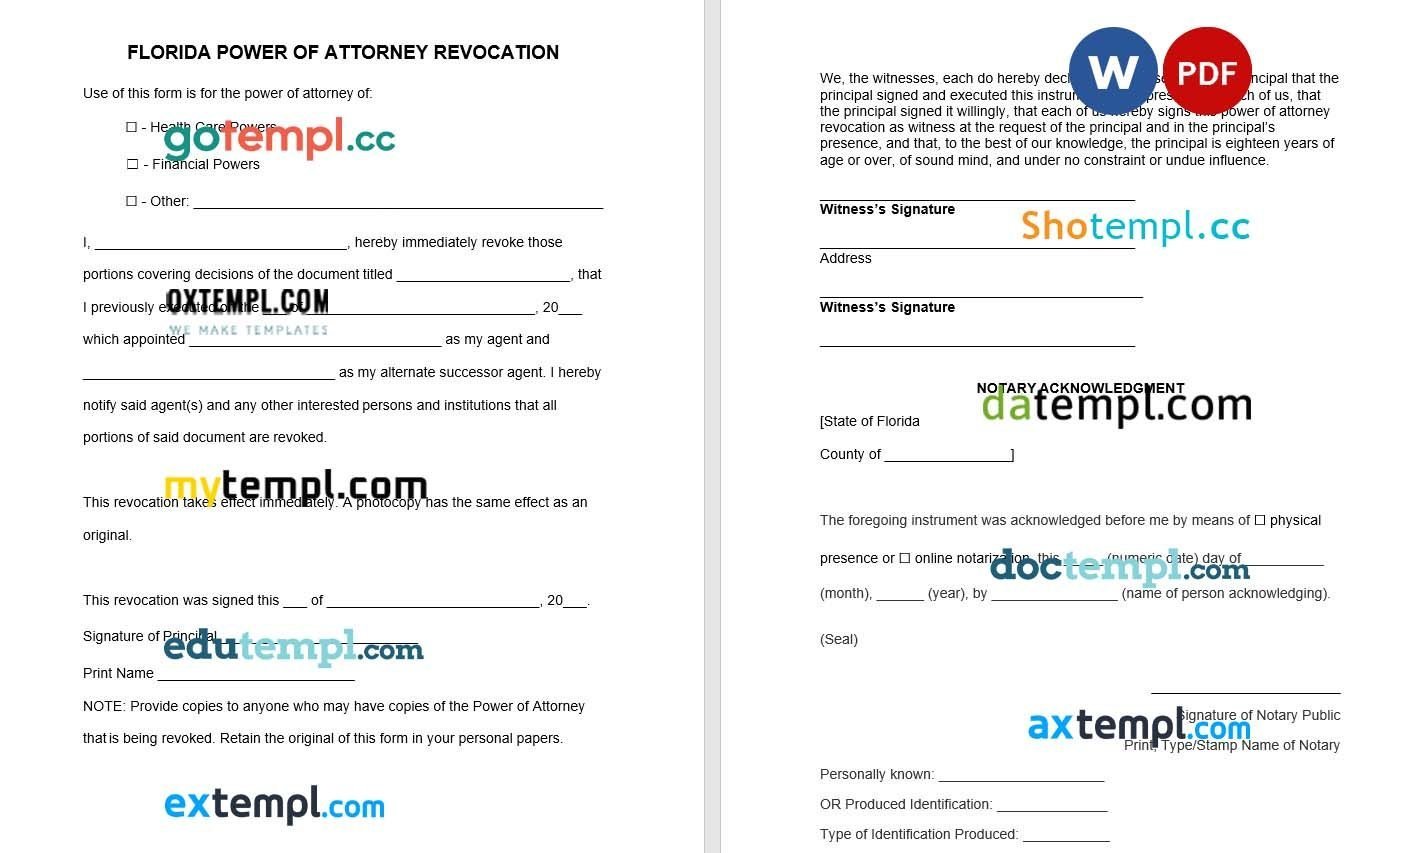 Florida Power of Attorney Revocation Form example, fully editable